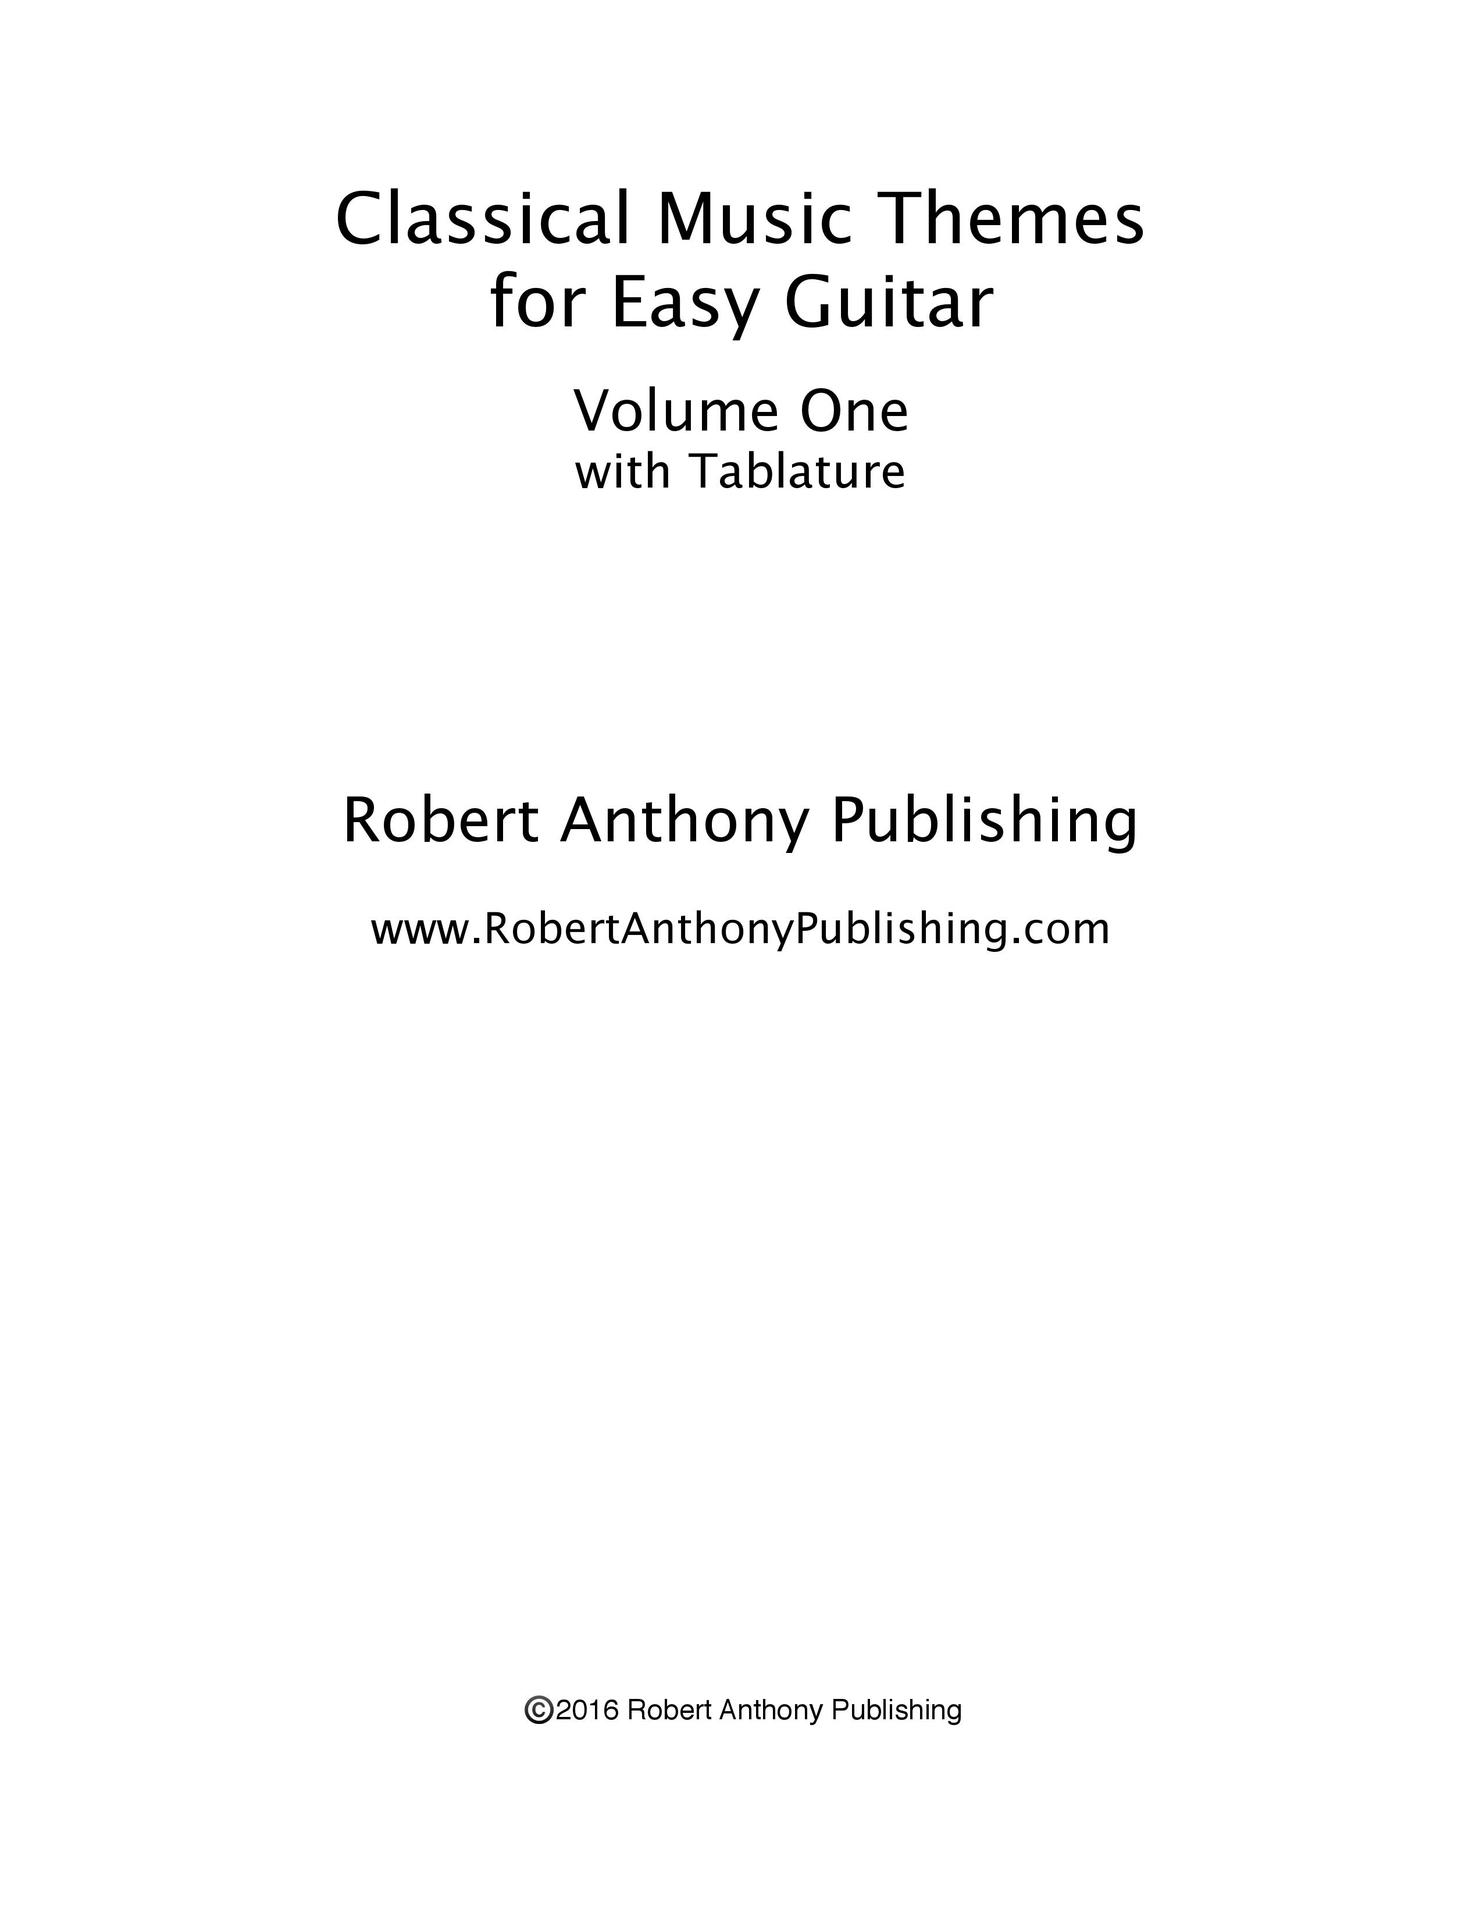 Classical Music Themes for Easy Guitar Classical Music Themes for Guitar Book 1 - photo 1